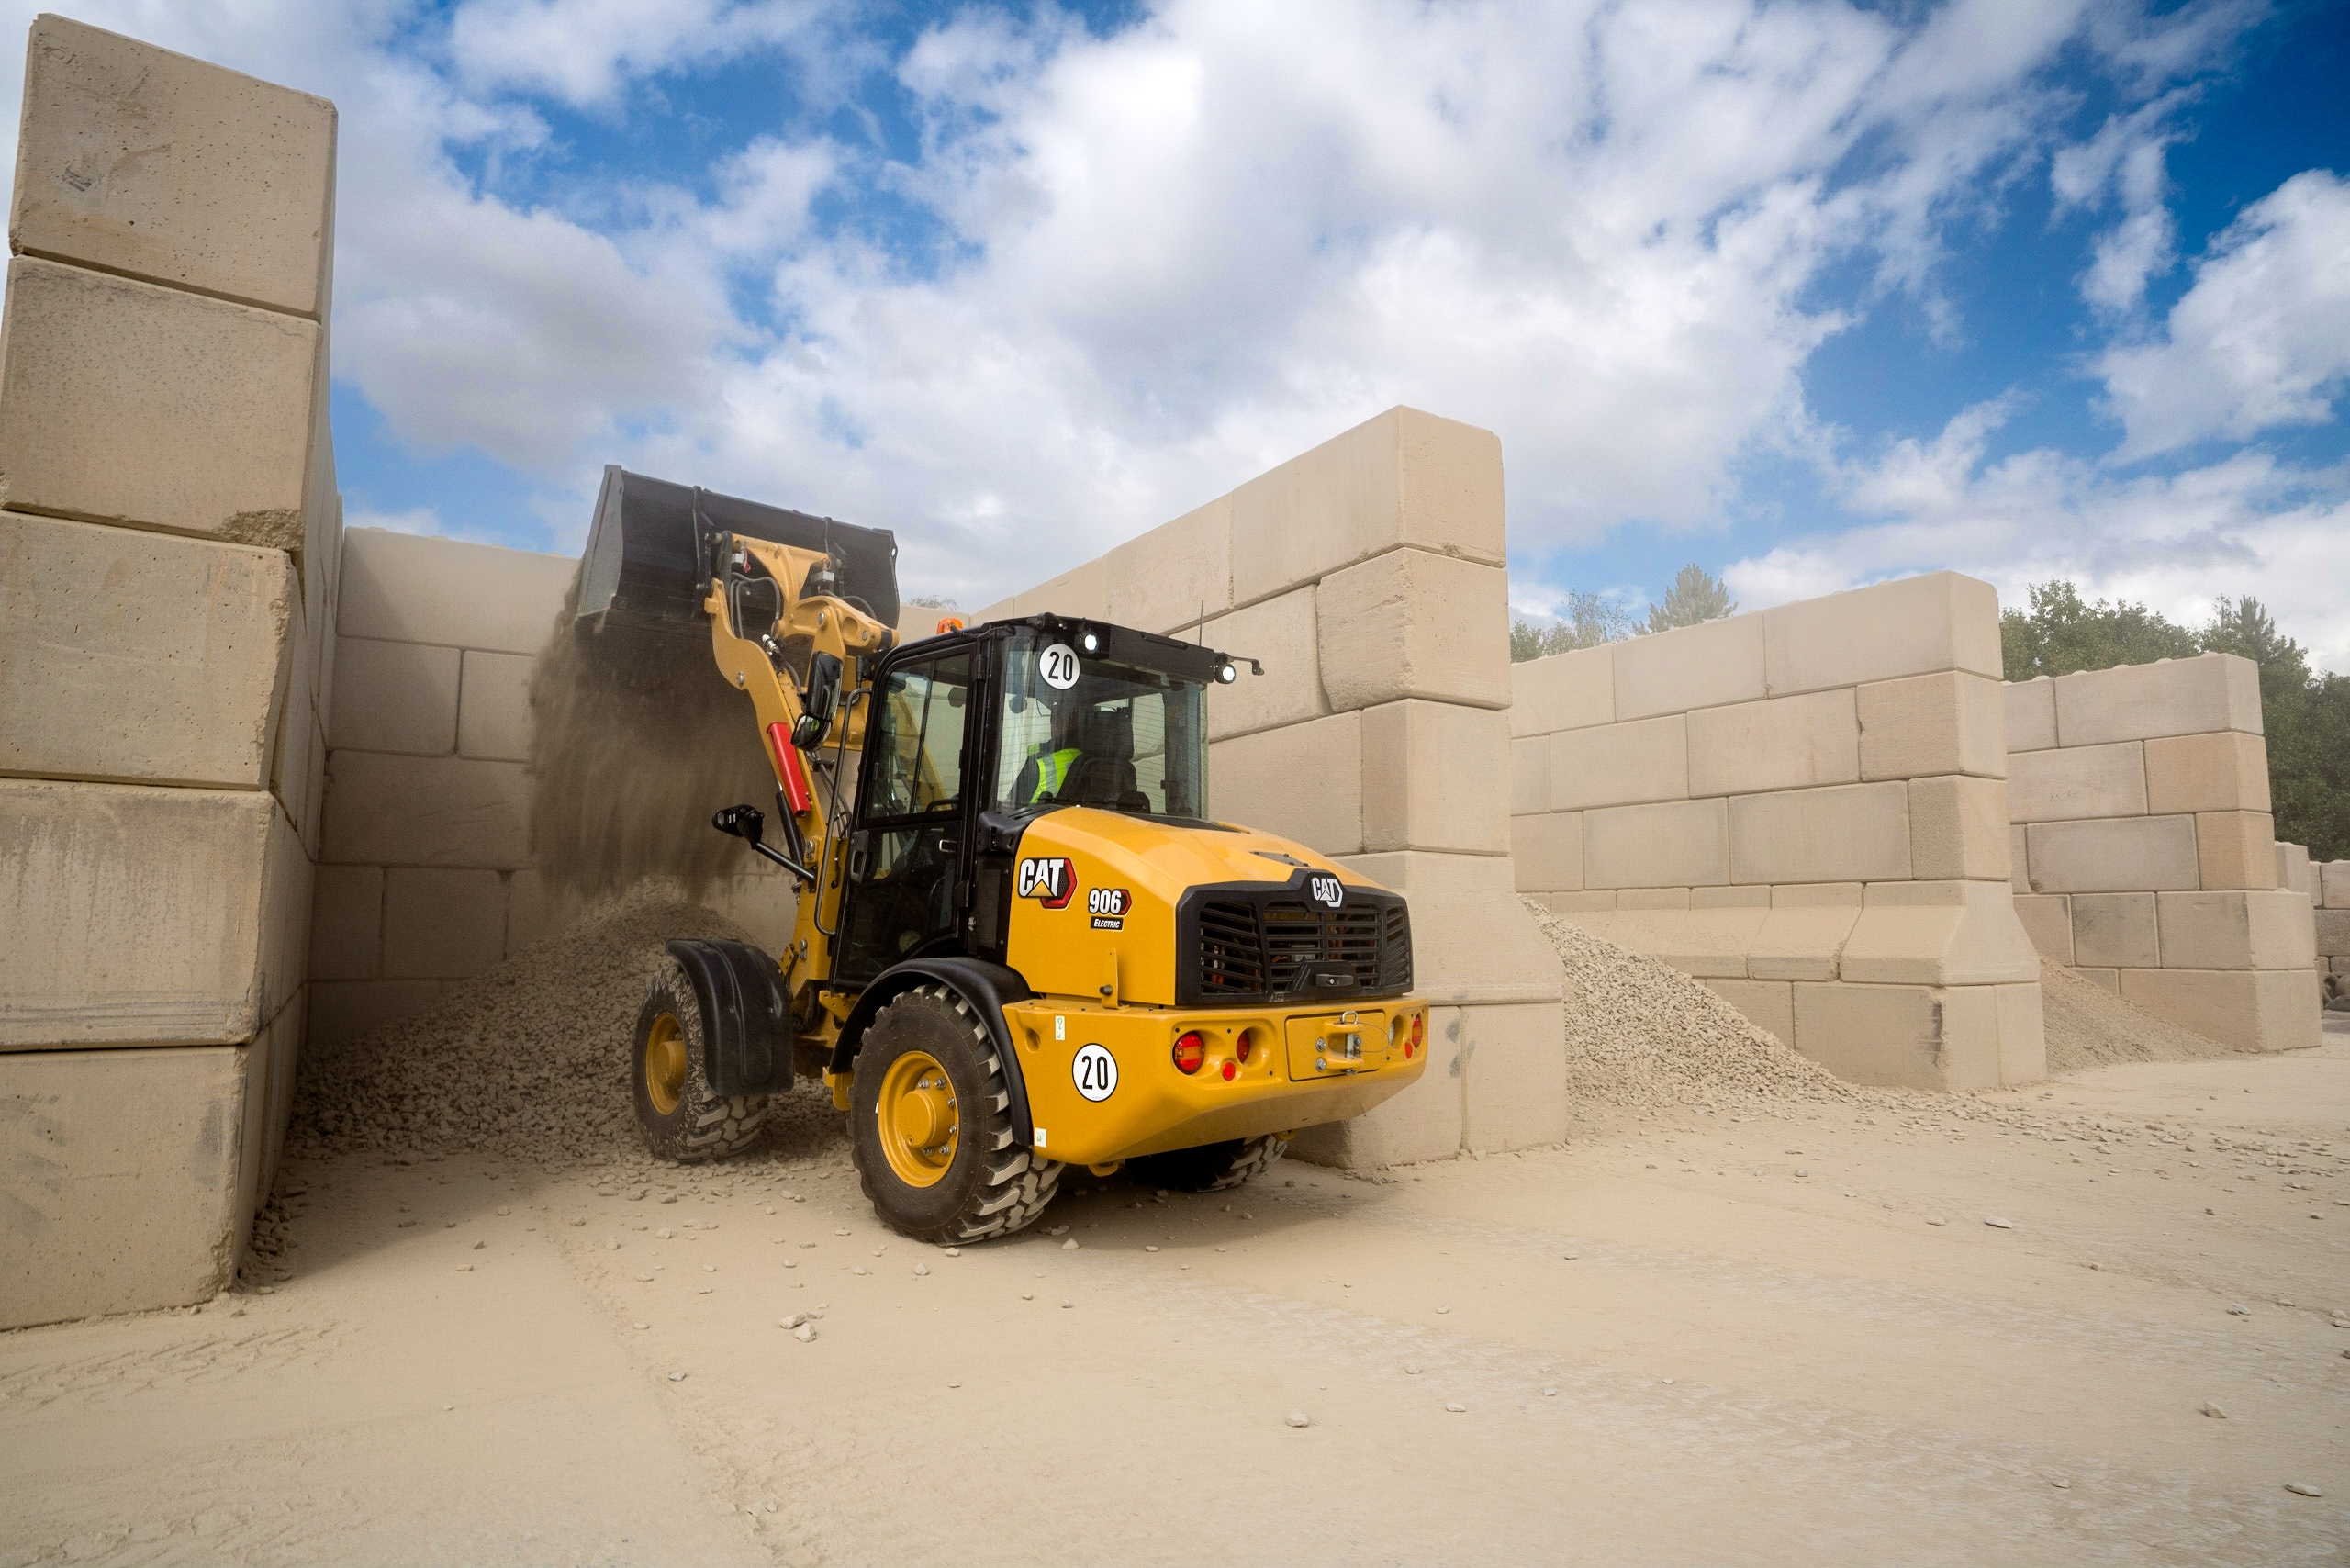 Caterpillar announces four battery electric machine prototypes will be on display at bauma 2022, including the 906 Compact Wheel Loader.